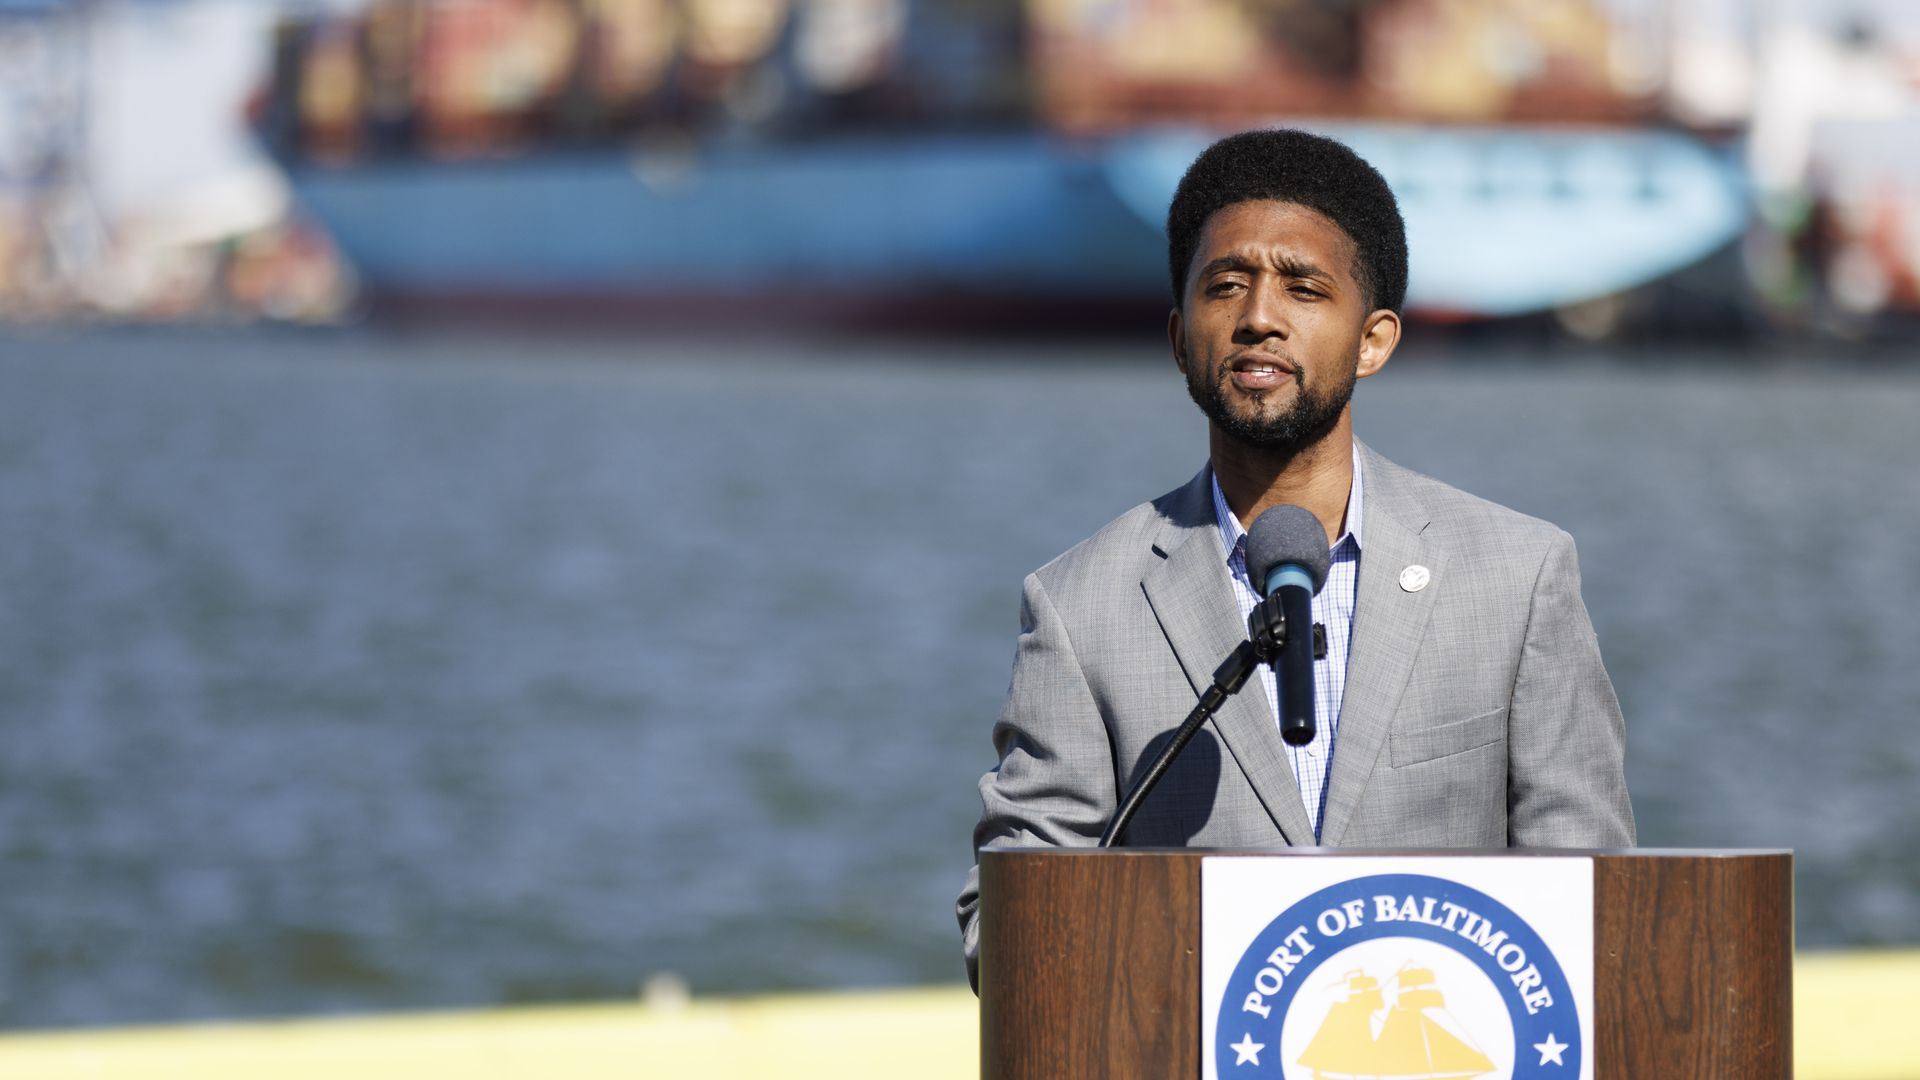 Brandon Scott, mayor of Baltimore, Maryland, speaks during a news conference in Baltimore, Maryland, U.S., on Monday, March 21.